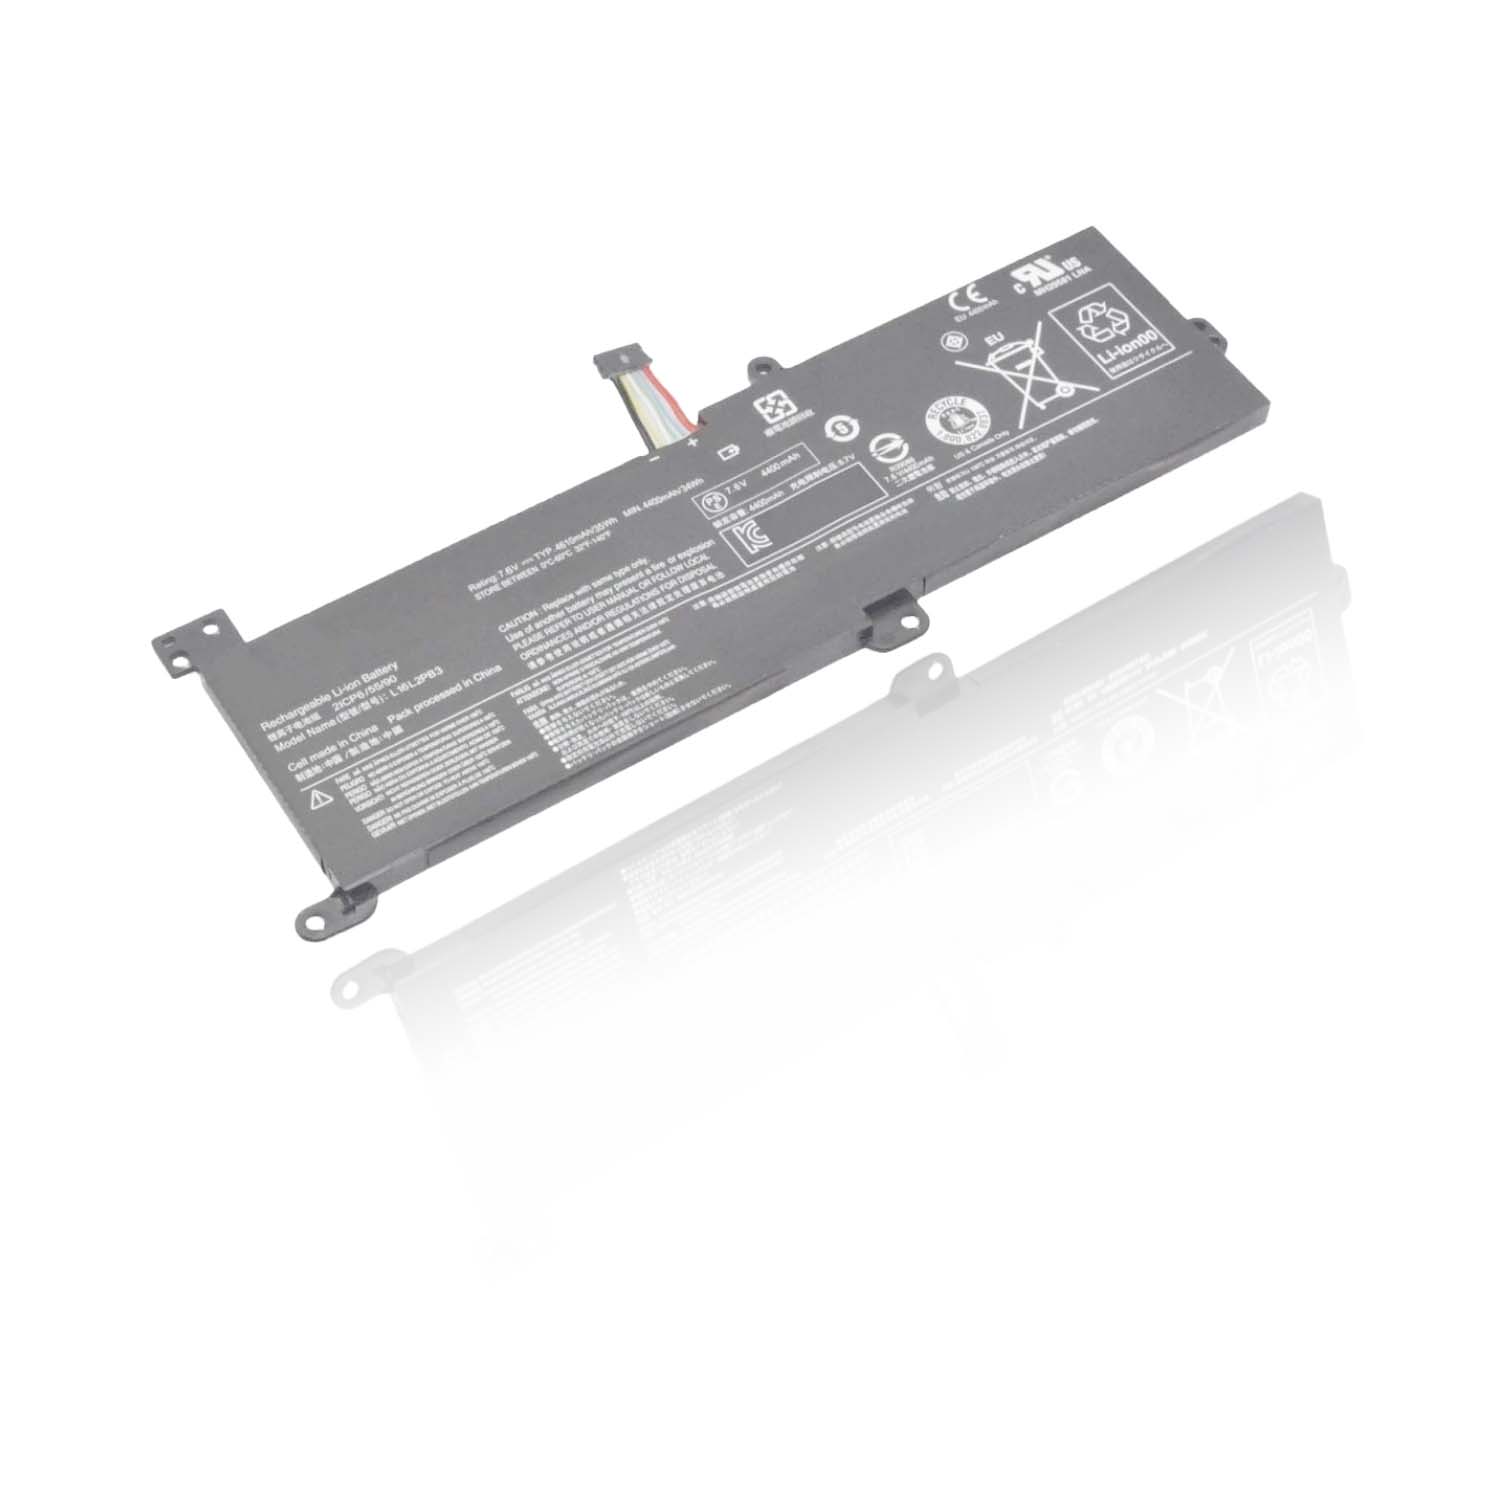 Lenovo L16L2PB3 Battery for IdeaPad 320 Series - Perfect Fit for 320-14IAP, 320-14AST, 320-15IAP, 320-15AST, 320-15ABR, 320-15ABR Touch